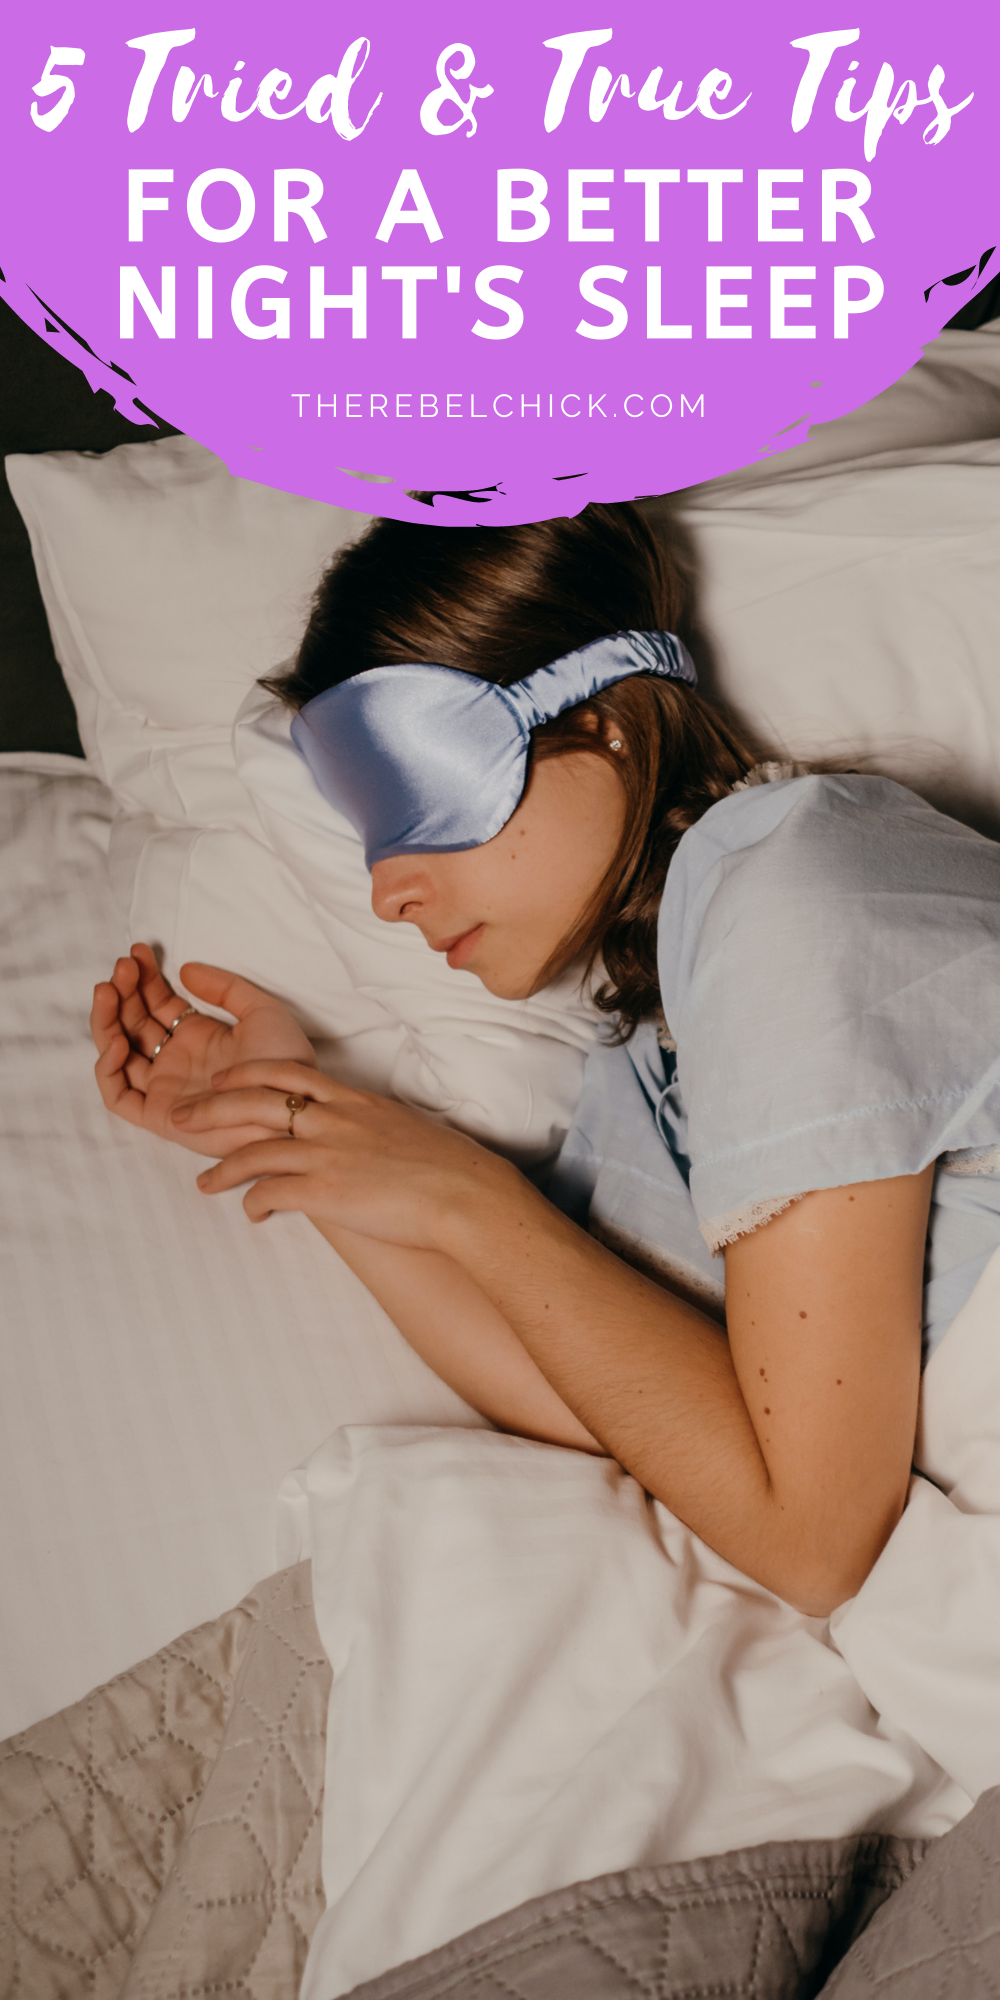 5 Tips for a Better Night's Sleep 